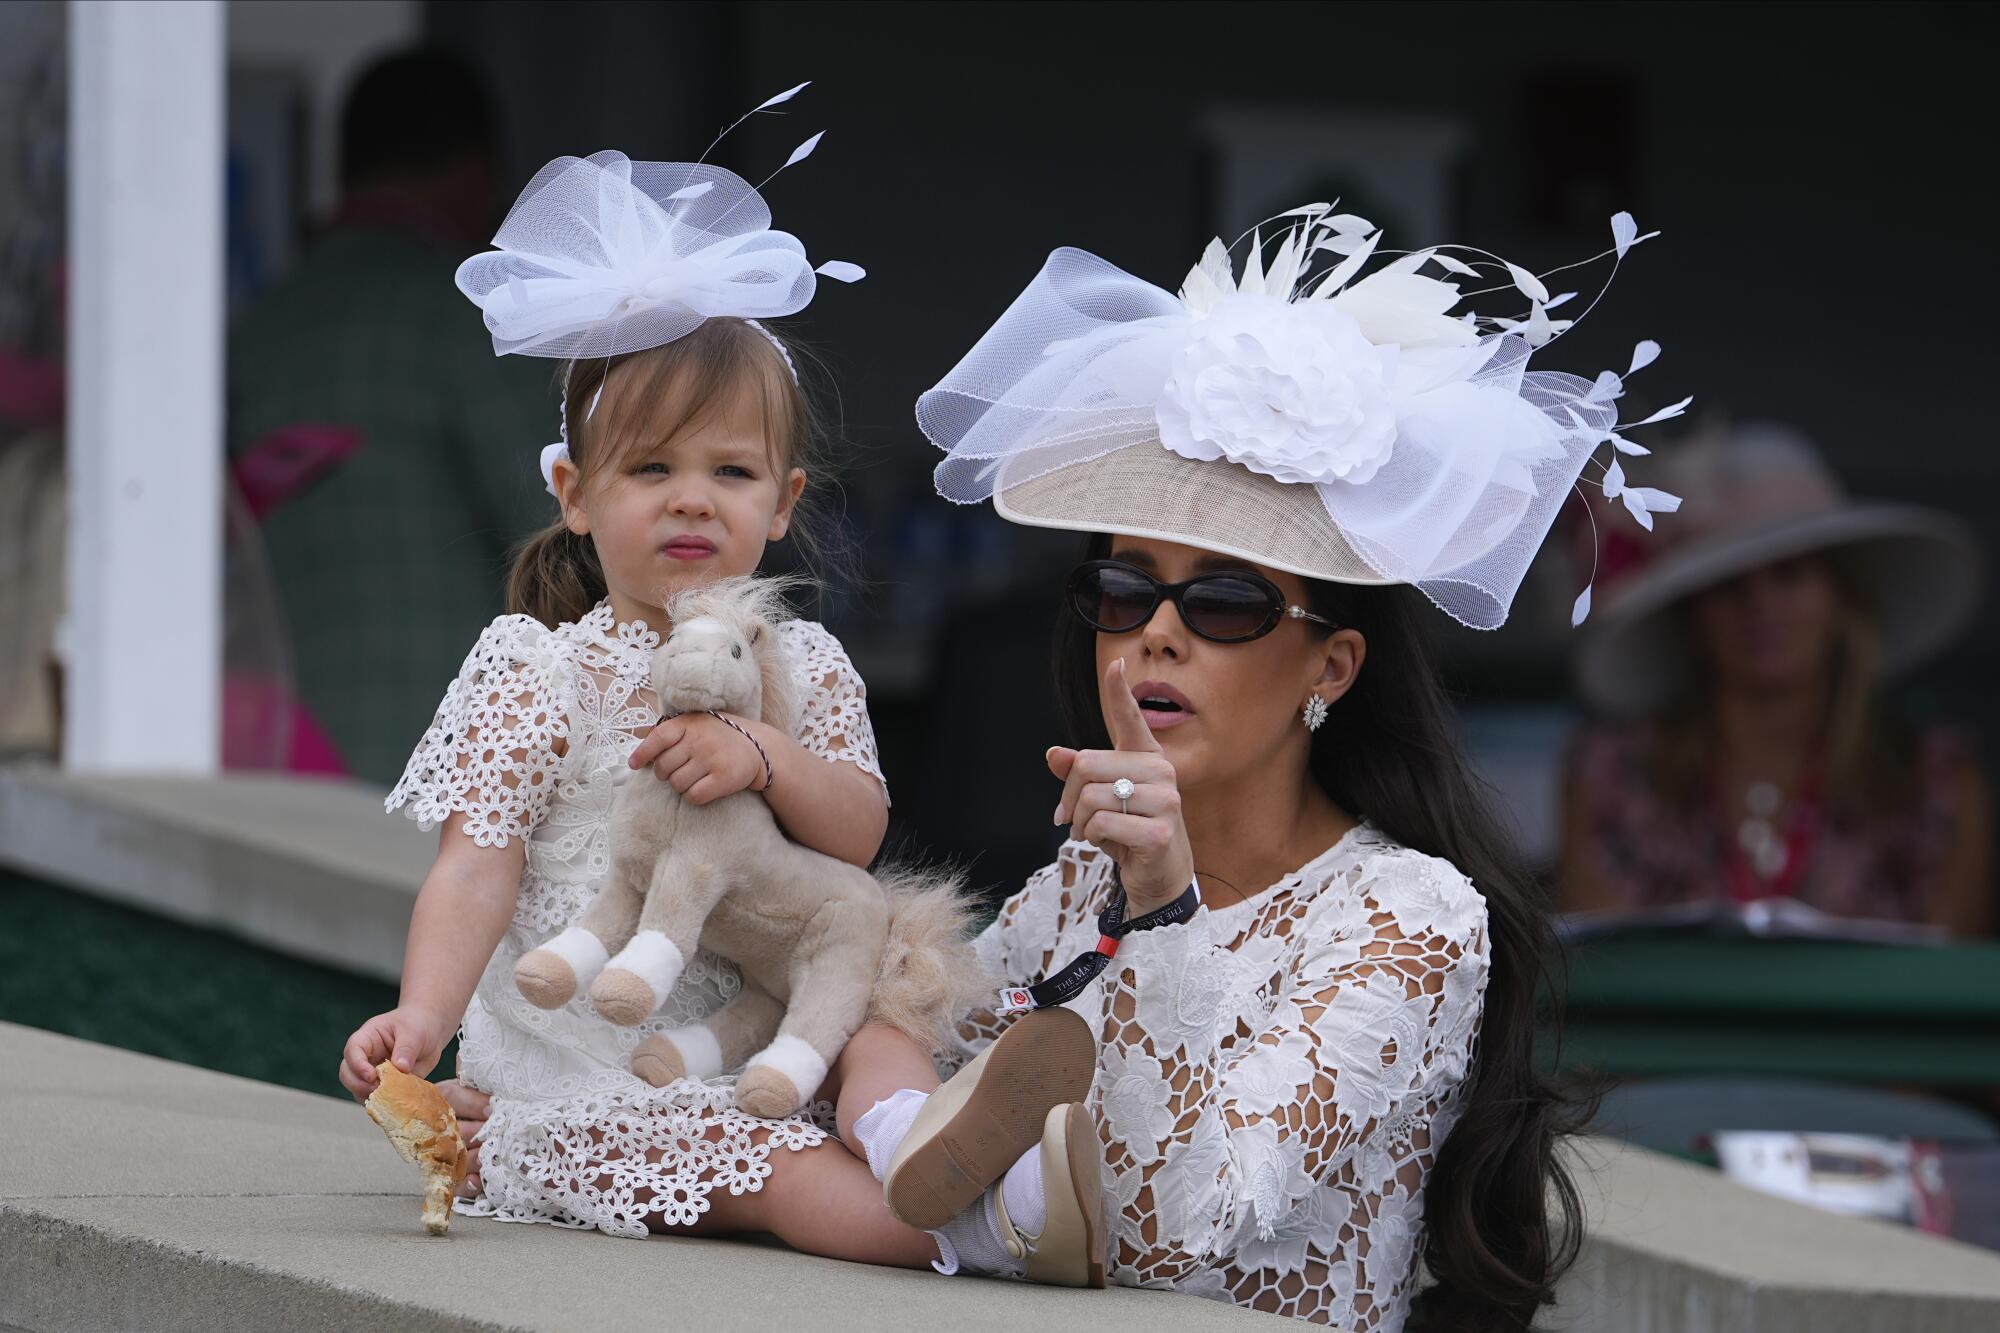 A woman and child wearing hats with distinct decorations wait at Churchill Downs.